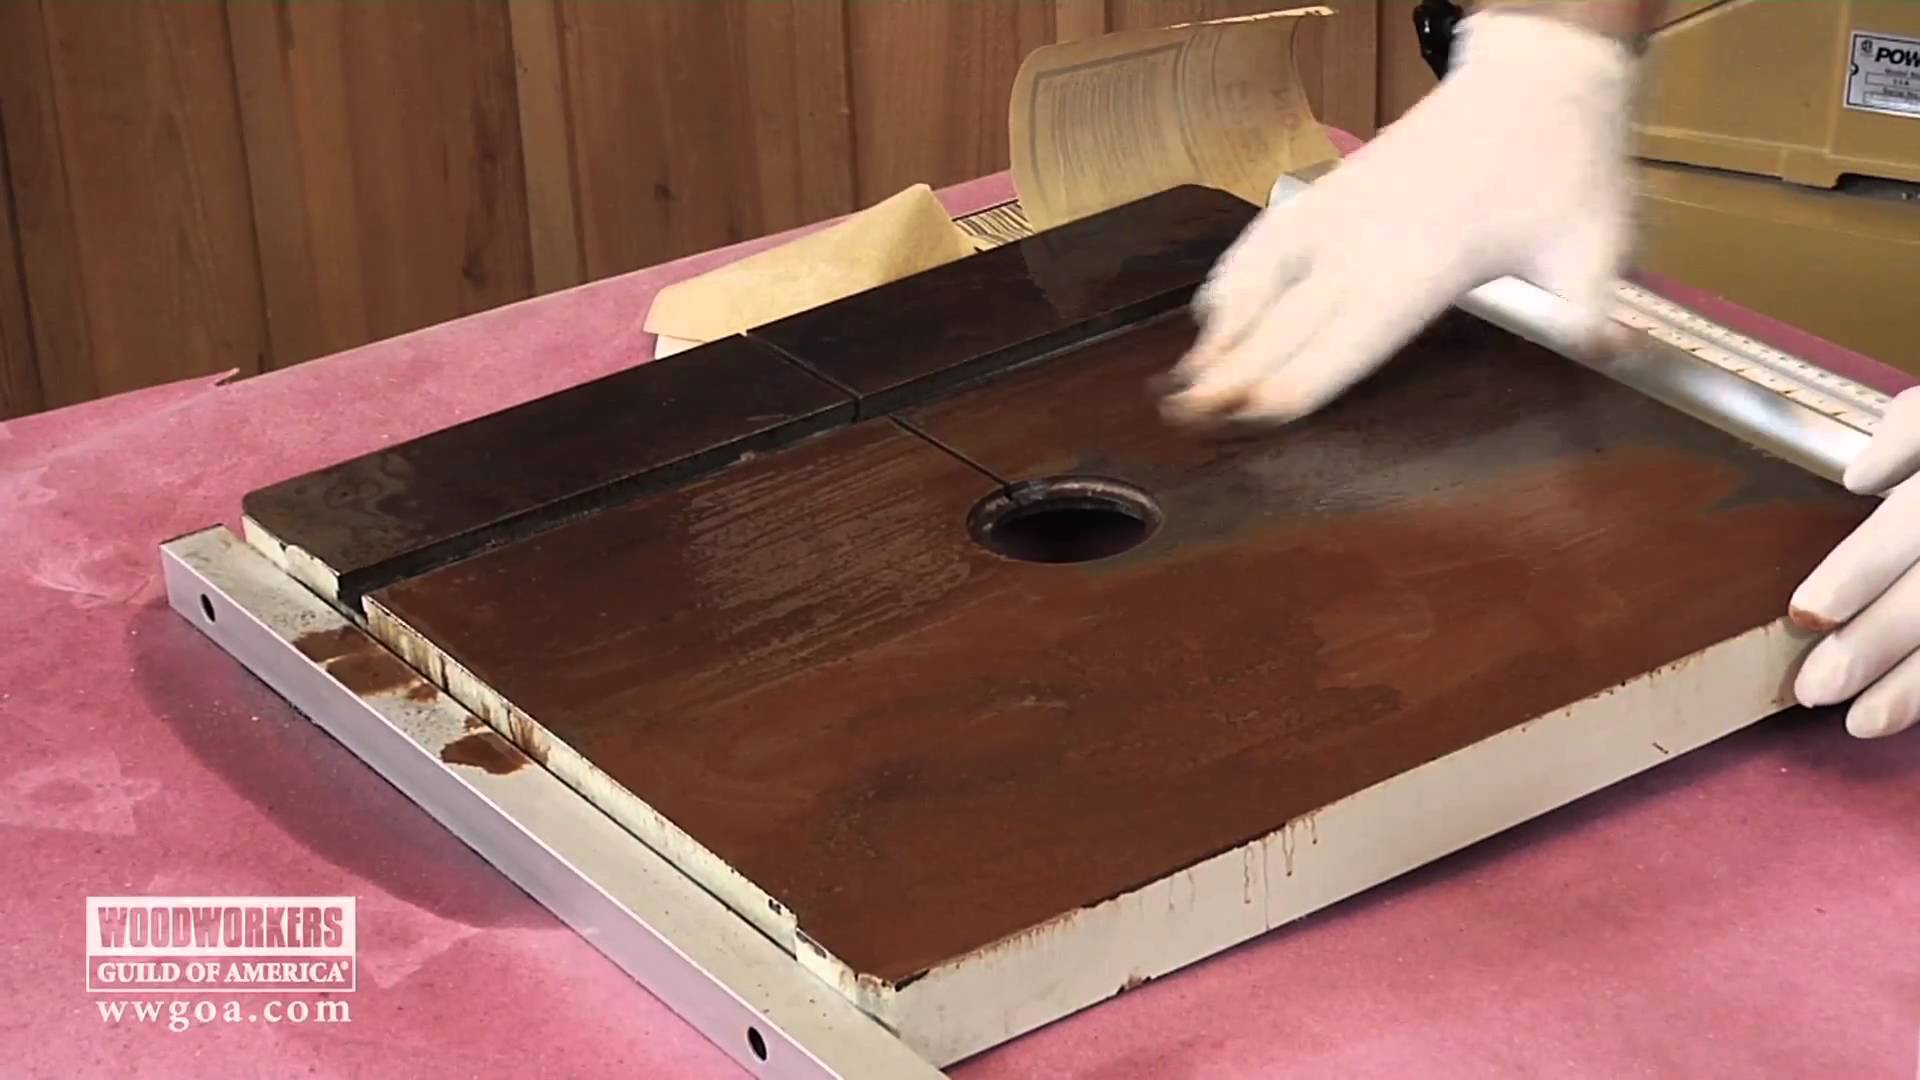 Woodworking Tip: Finishing - Cleaning a Rusty Table - YouTube